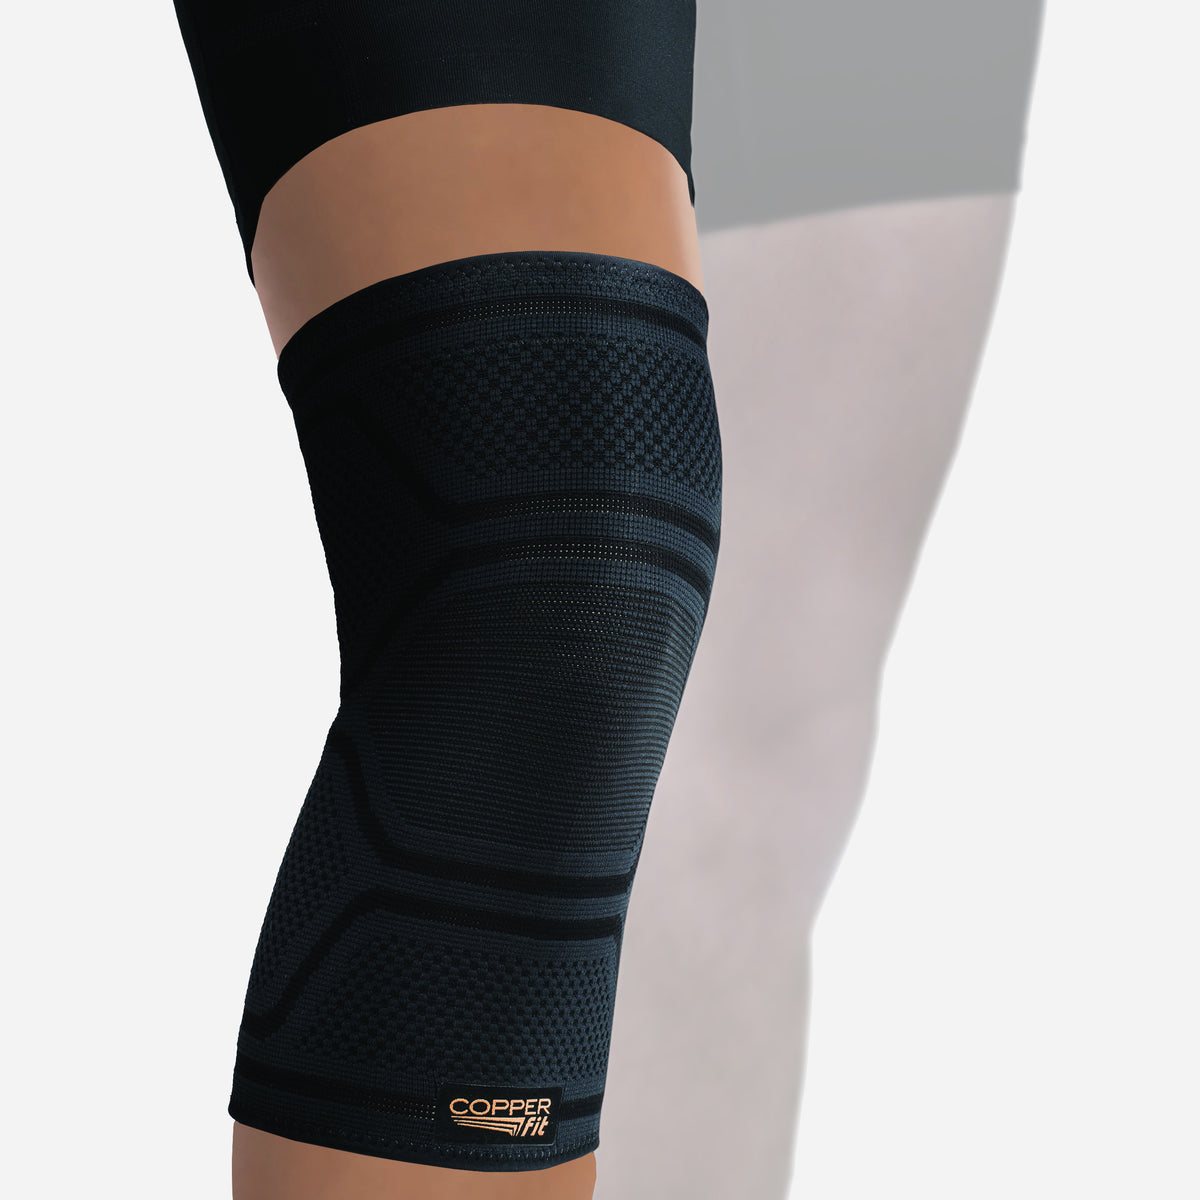 Copper fit rapid relief knee and wrist compression Bangladesh